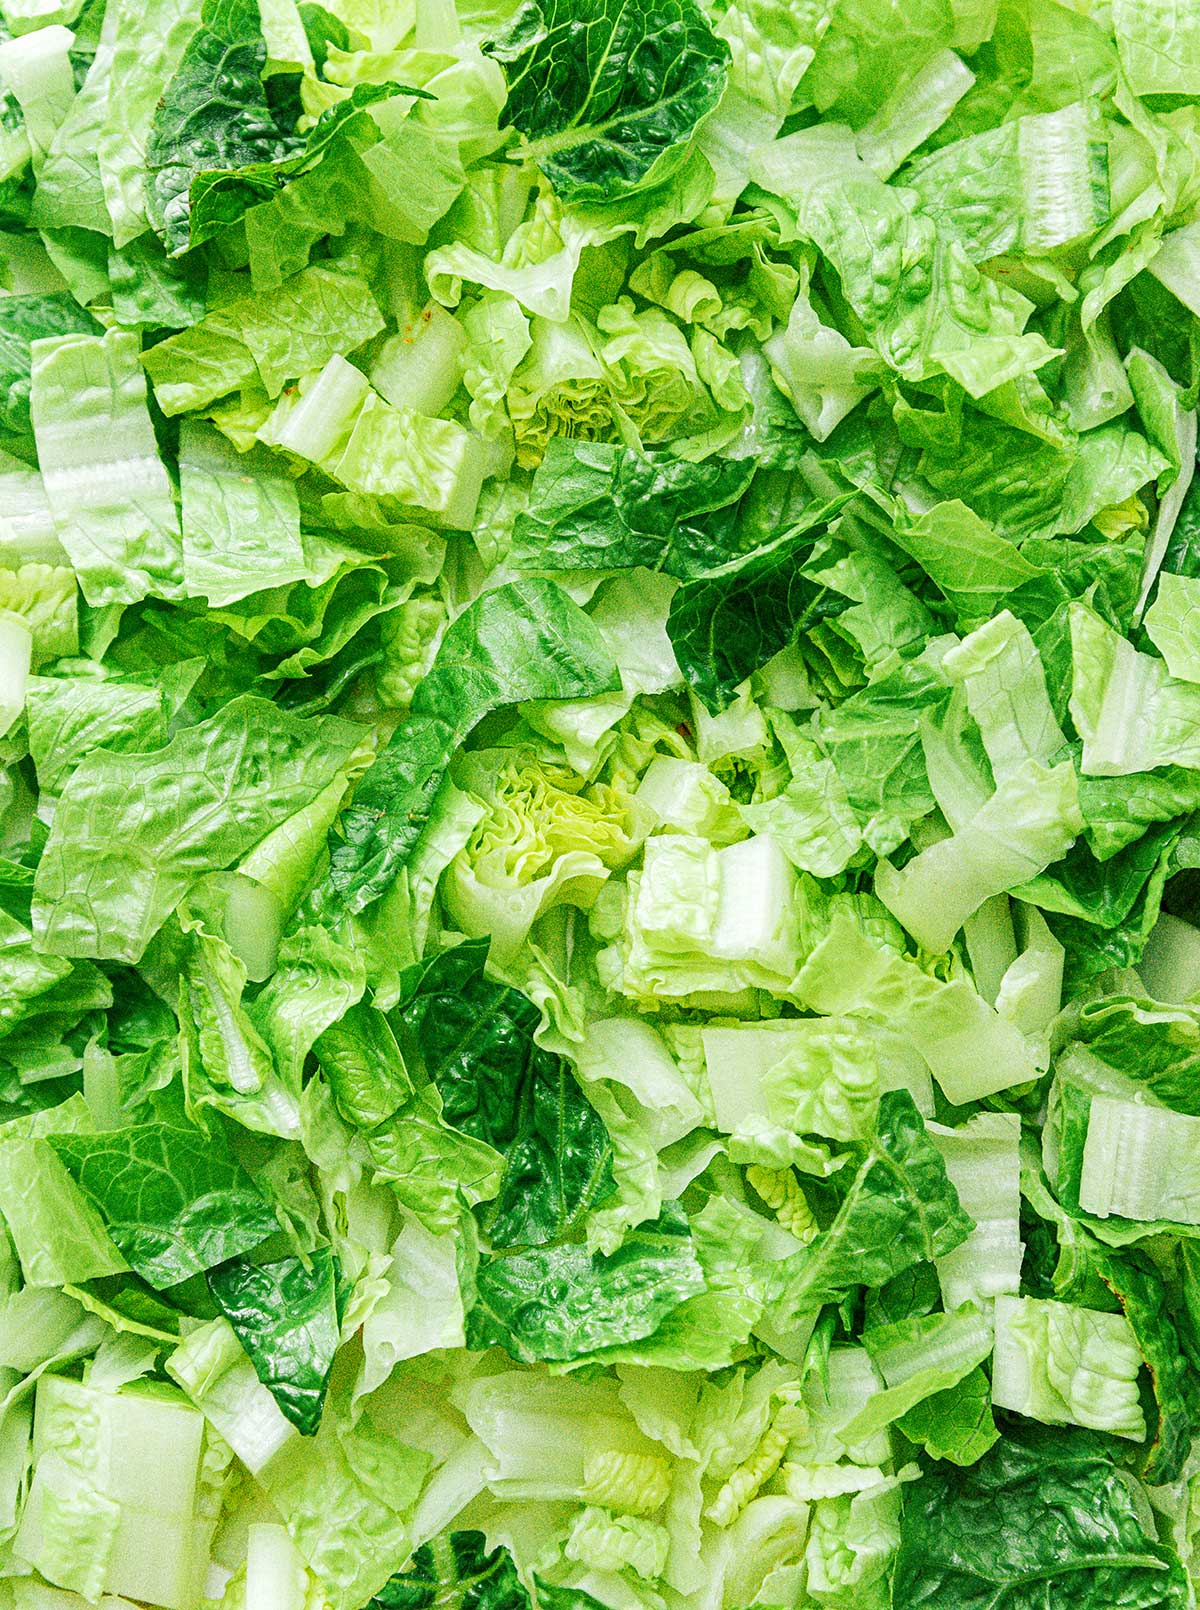 A up-close view detailing the texture of sliced romaine lettuce